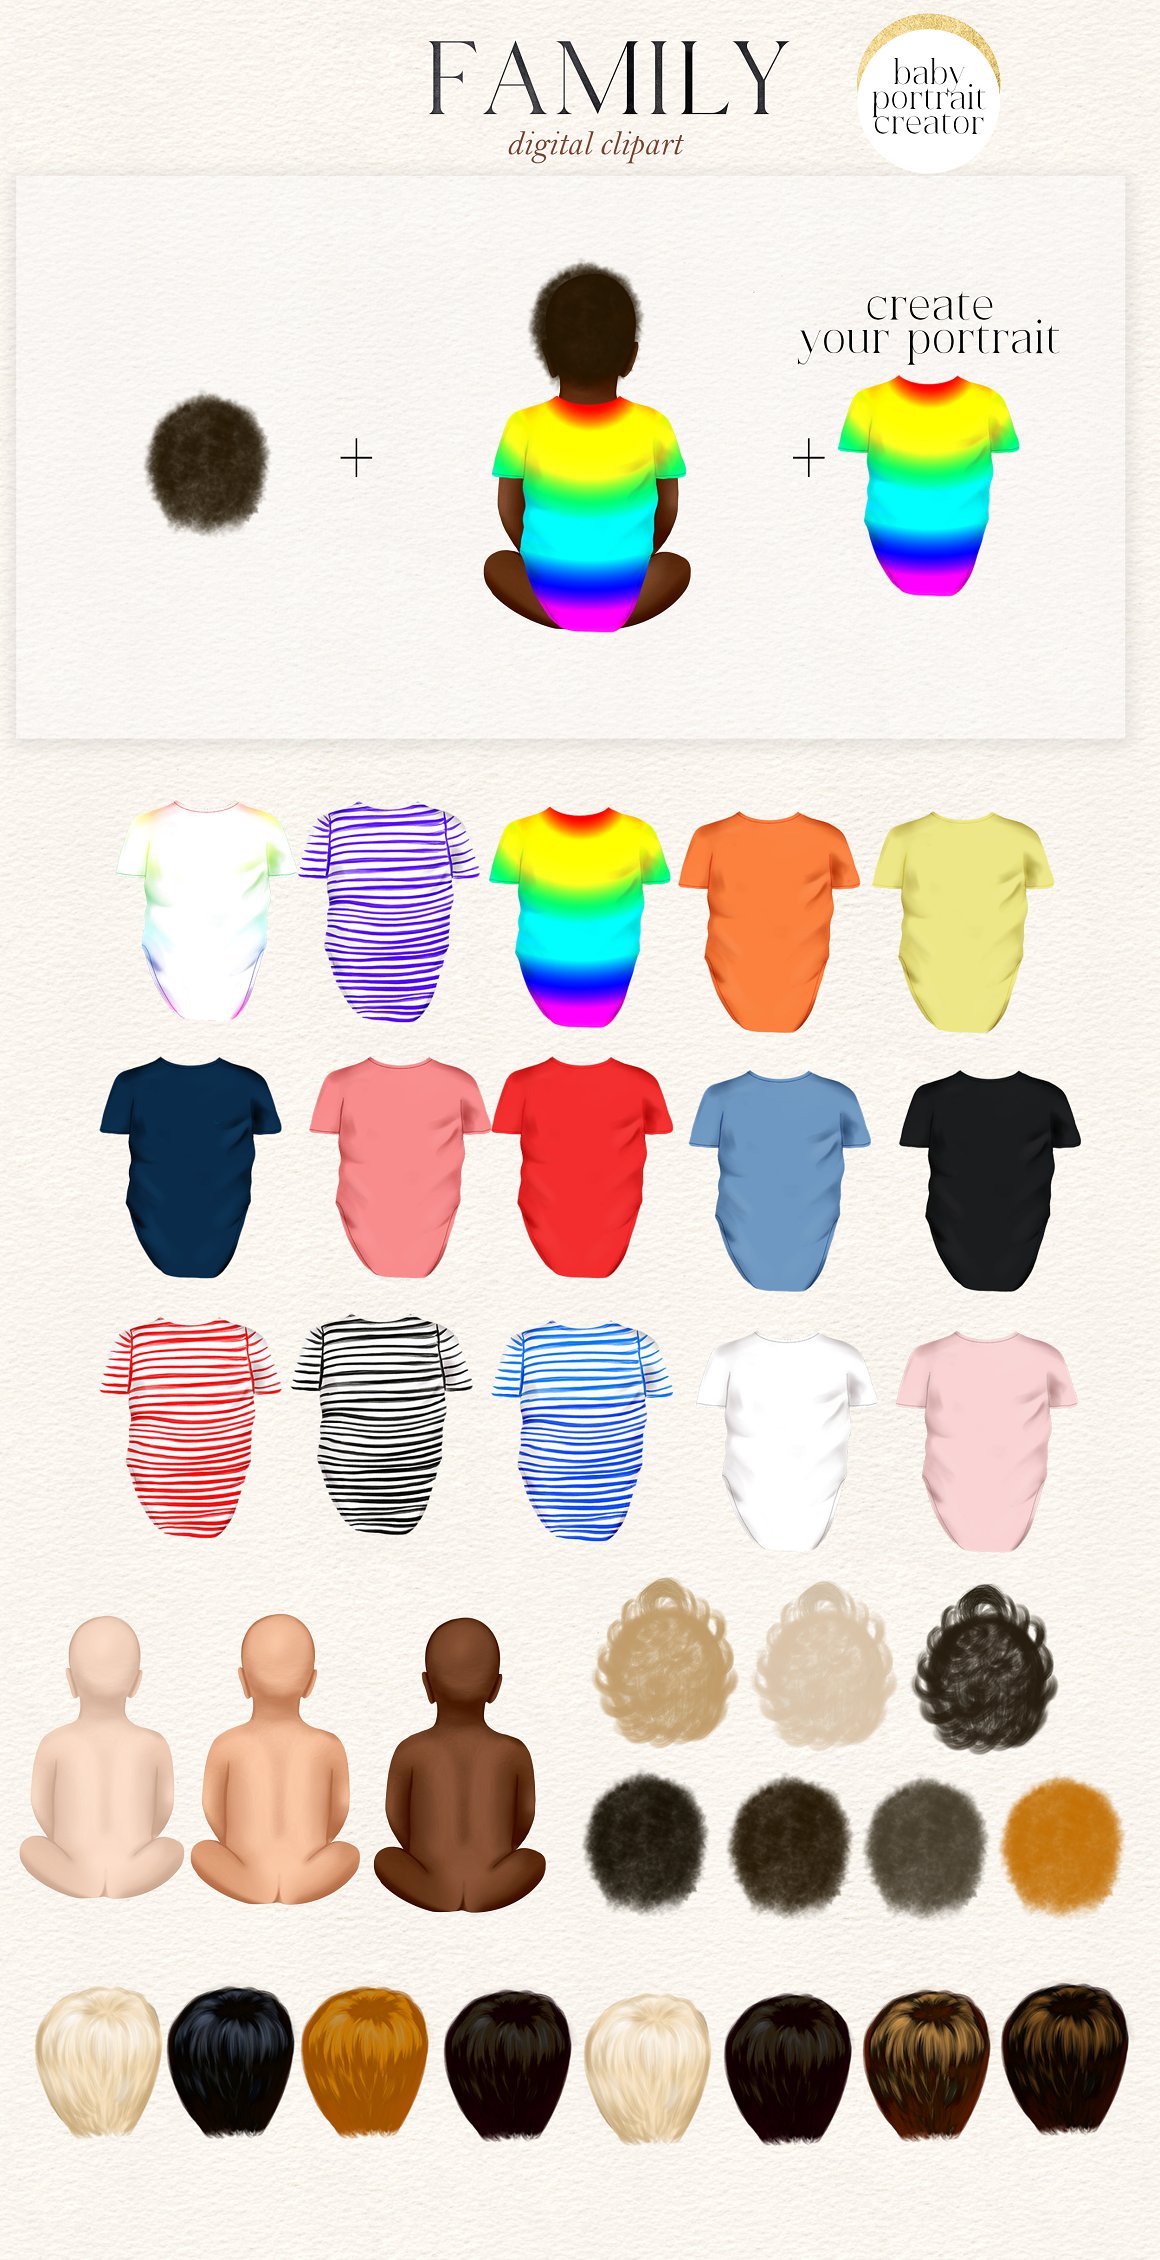 Baby clipart of body in different skin tones, clothes and hairstyles.